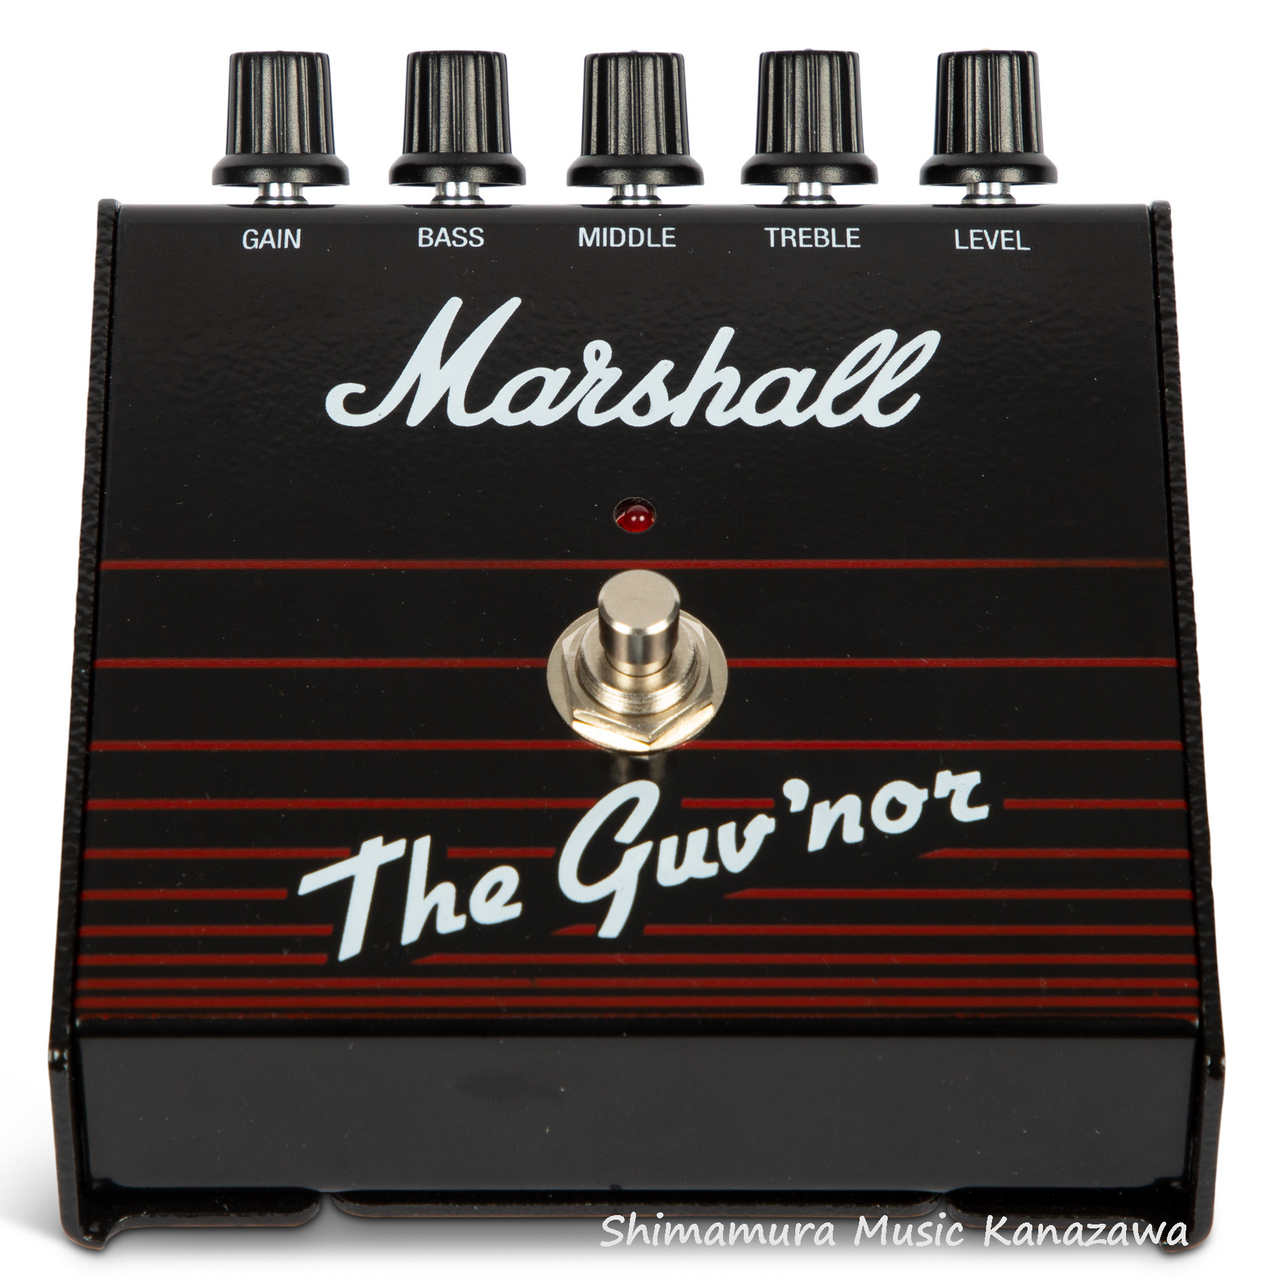 Marshall 60th Anniversary Model The Guv'nor PEDL-00101【数量限定